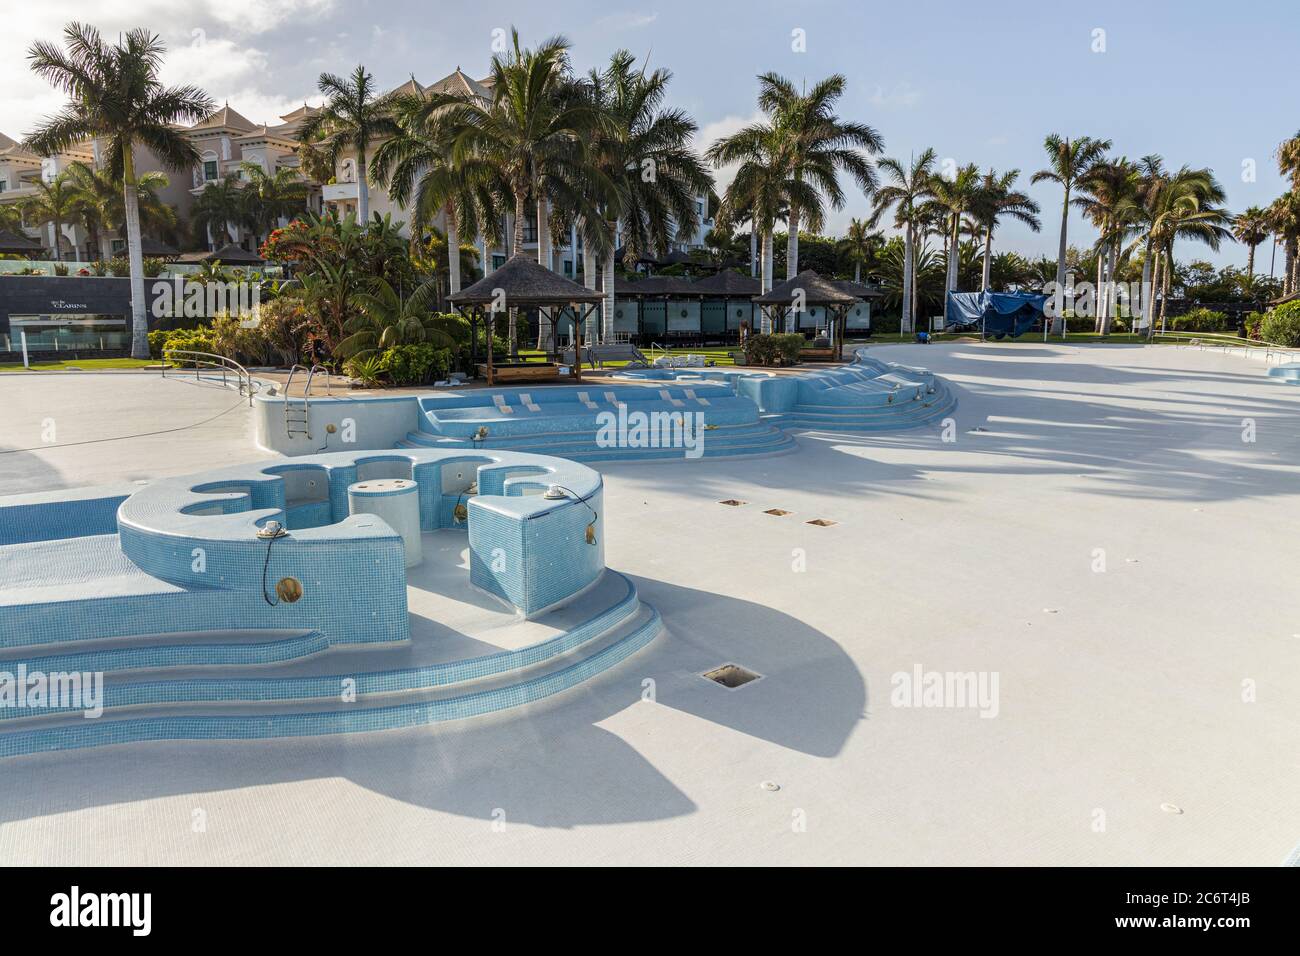 Empty swimming pool at the Palacio de Isora hotel undergoing maintainance in the aftermath of the covid 19 lockdown prior to reopening, La Jaquita, Al Stock Photo